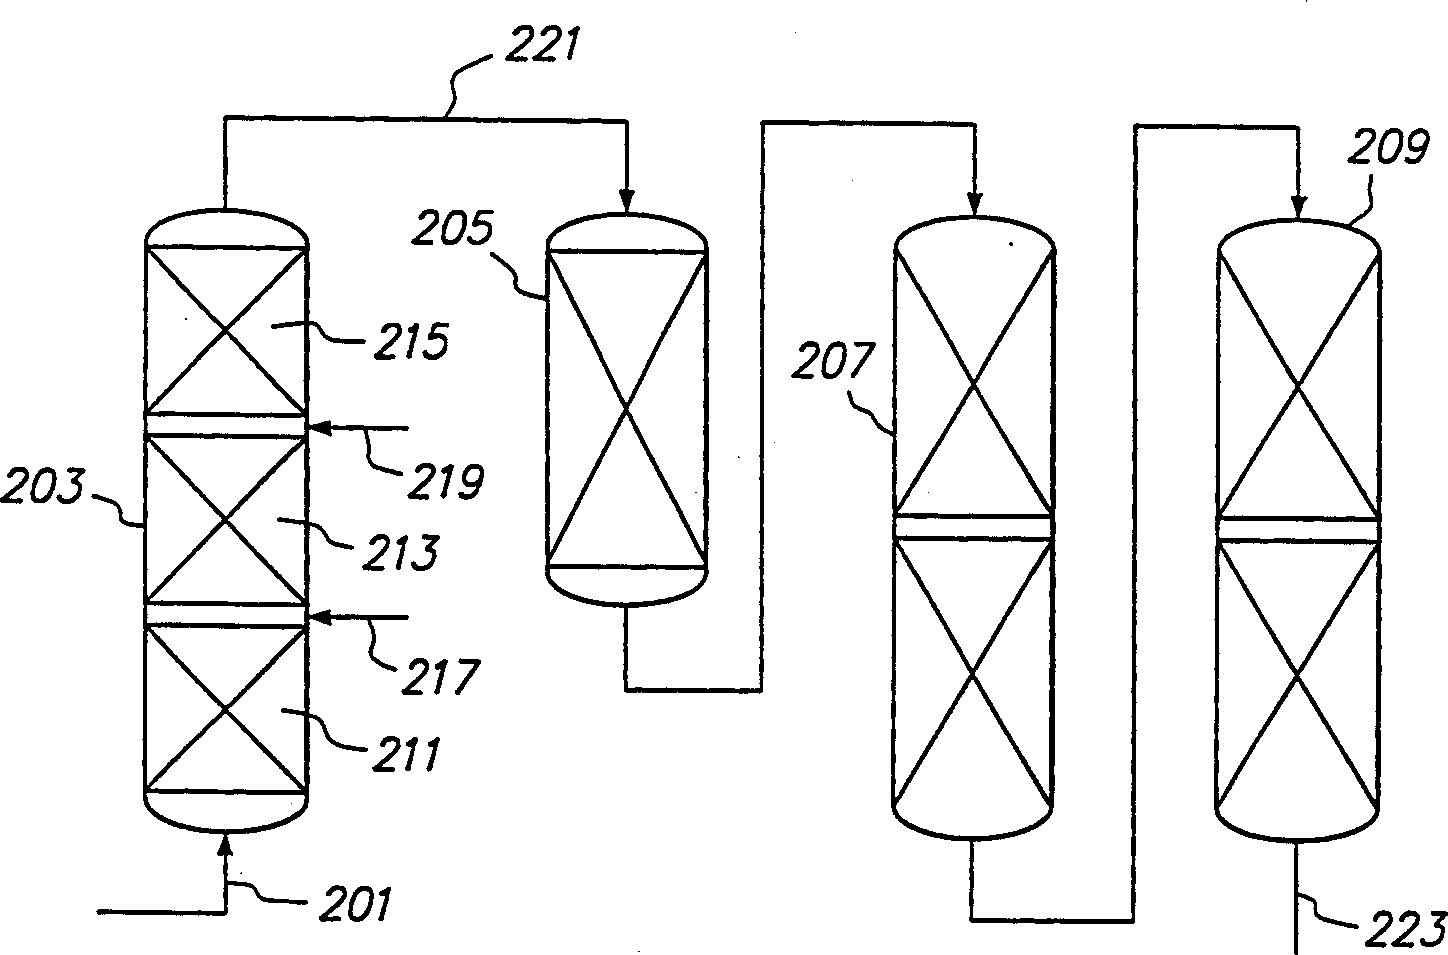 Upflow reactor system with layered catalyst bed for hydrotreating heavy feedstocks